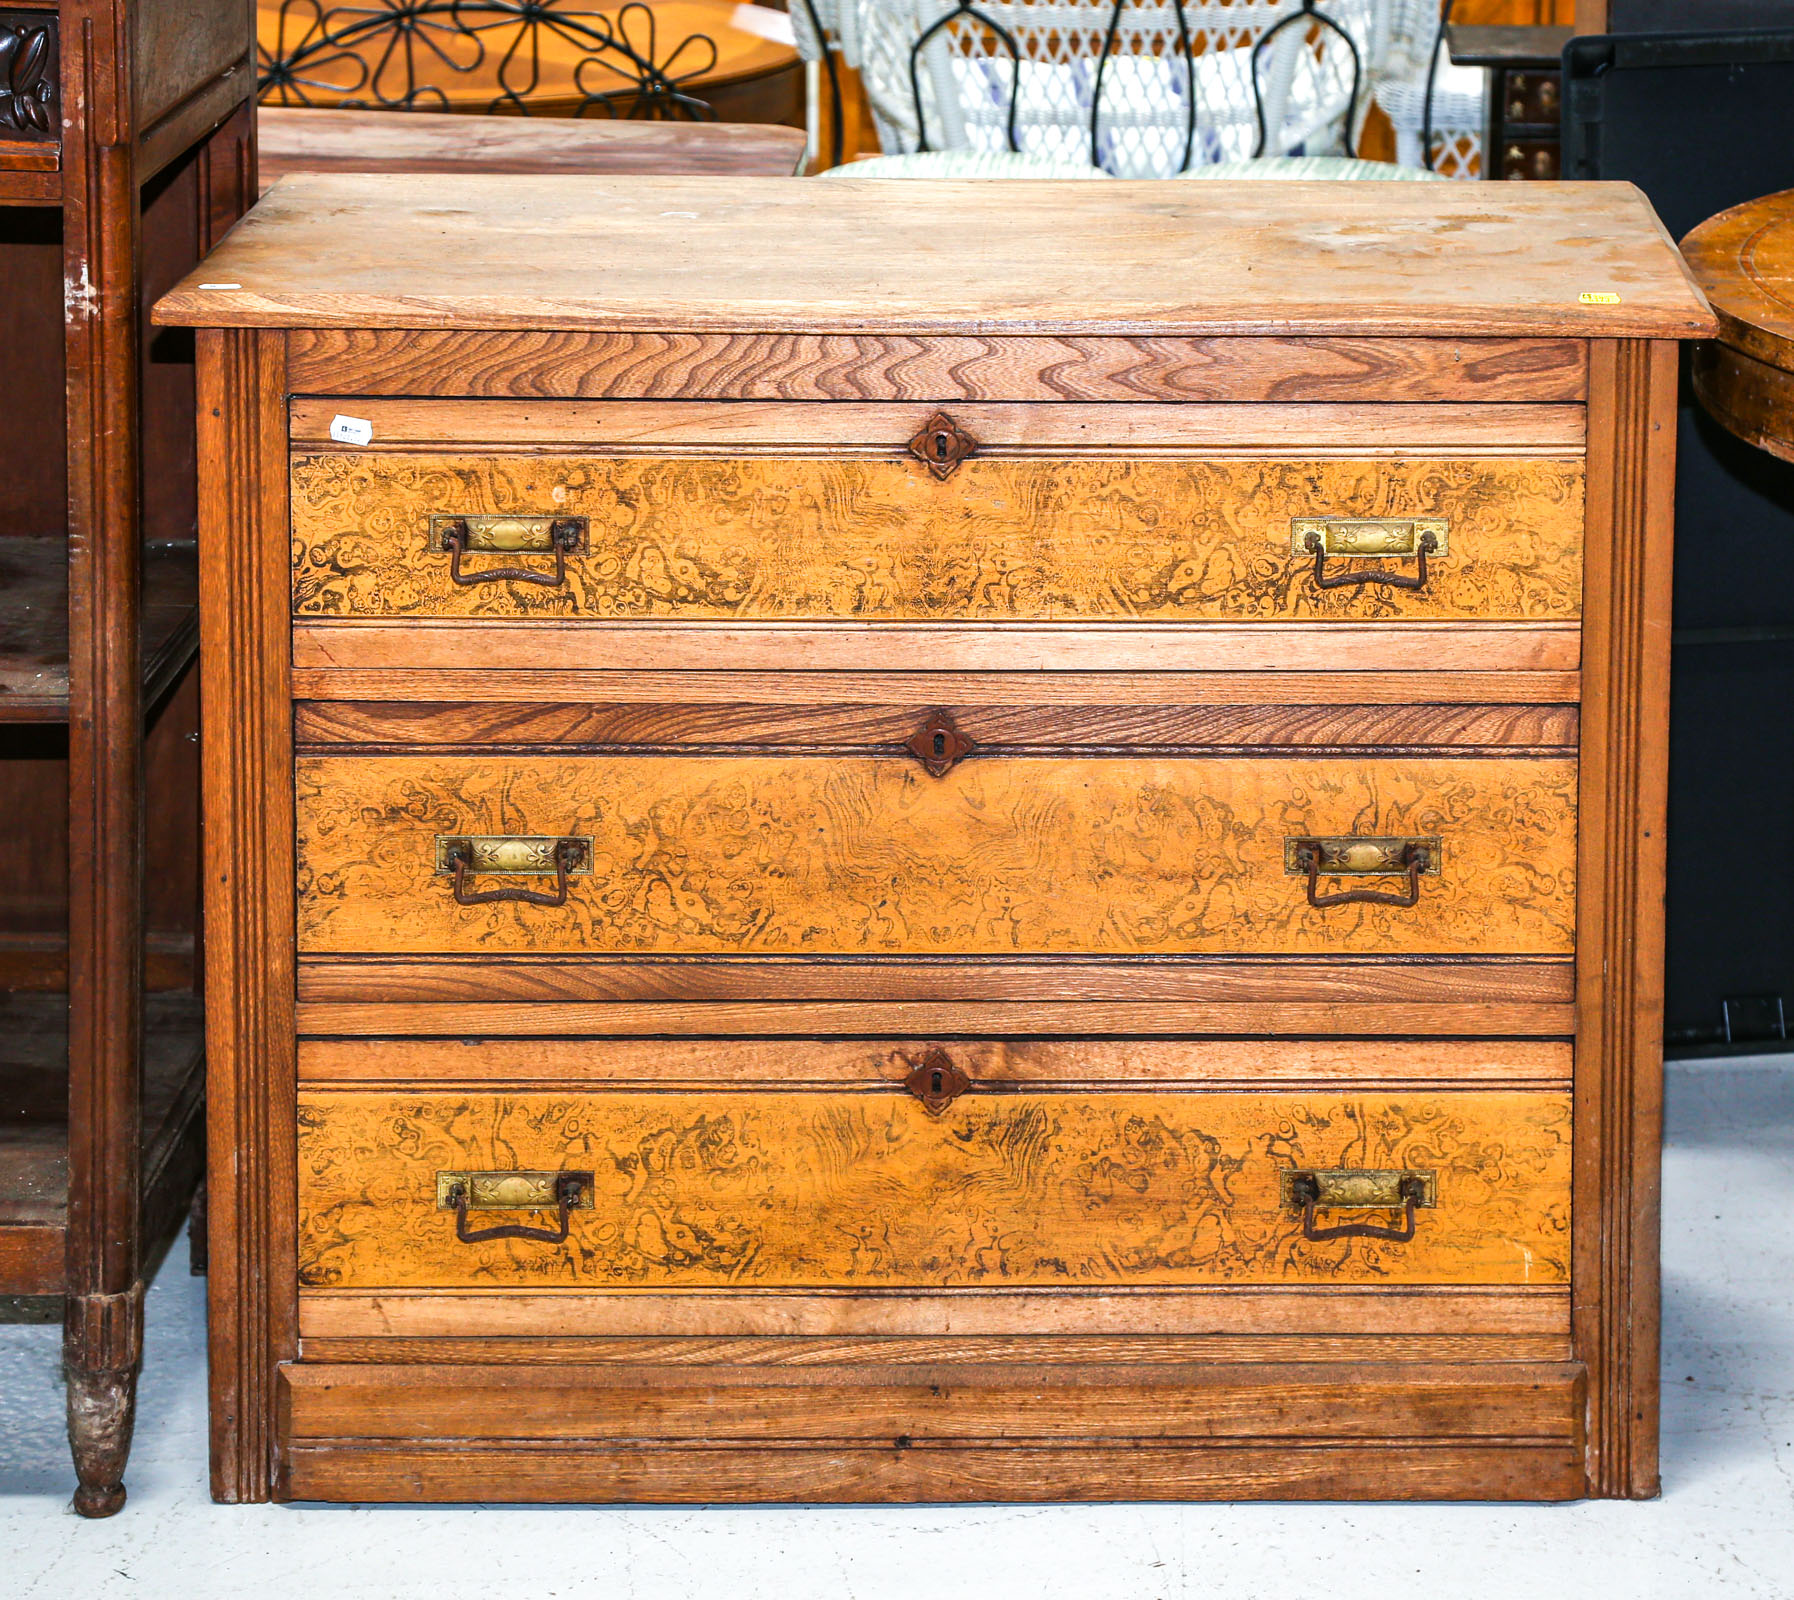 AMERICAN EASTLAKE STYLE CHEST OF 2e9272